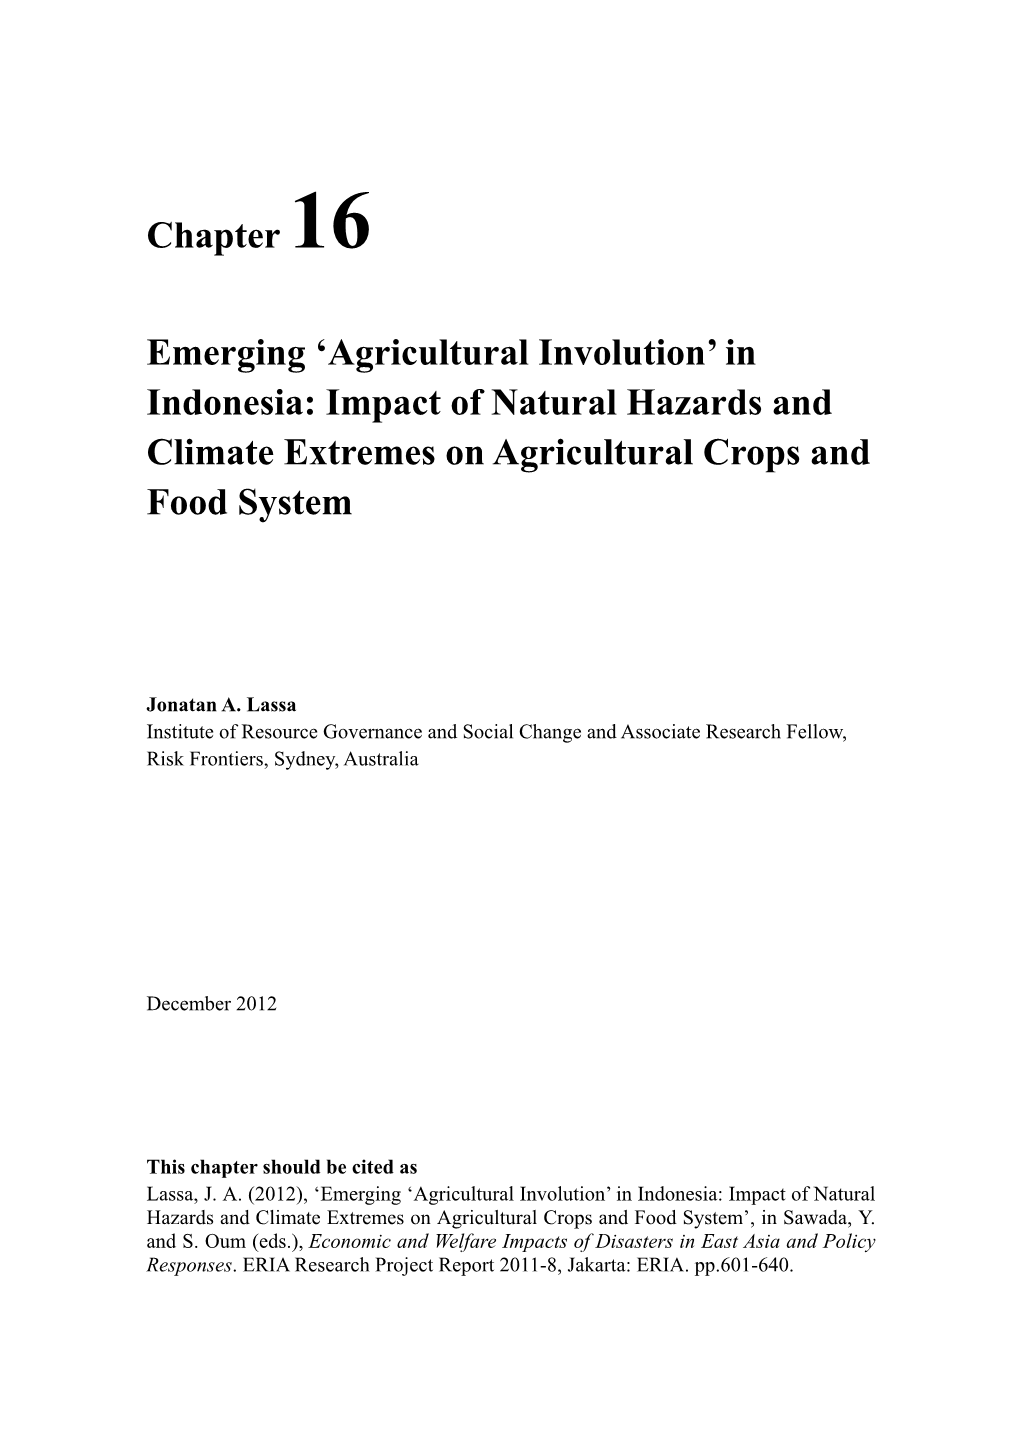 'Agricultural Involution' in Indonesia